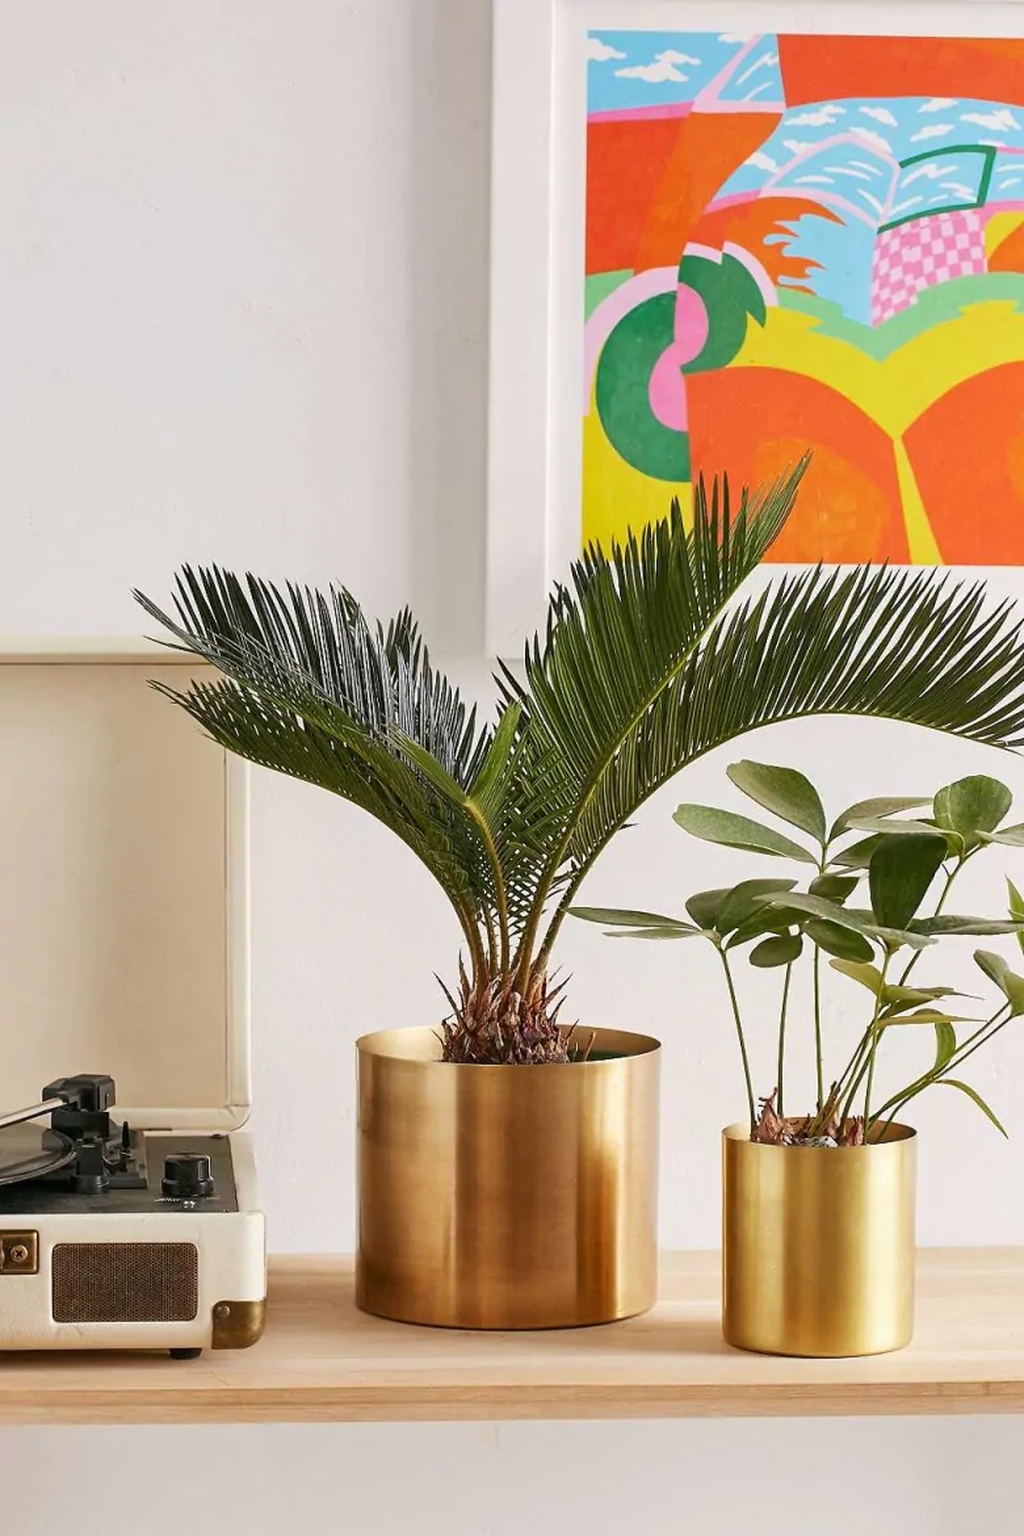 Marvelous Small Planters Ideas To Maximize Your Interior Design 45